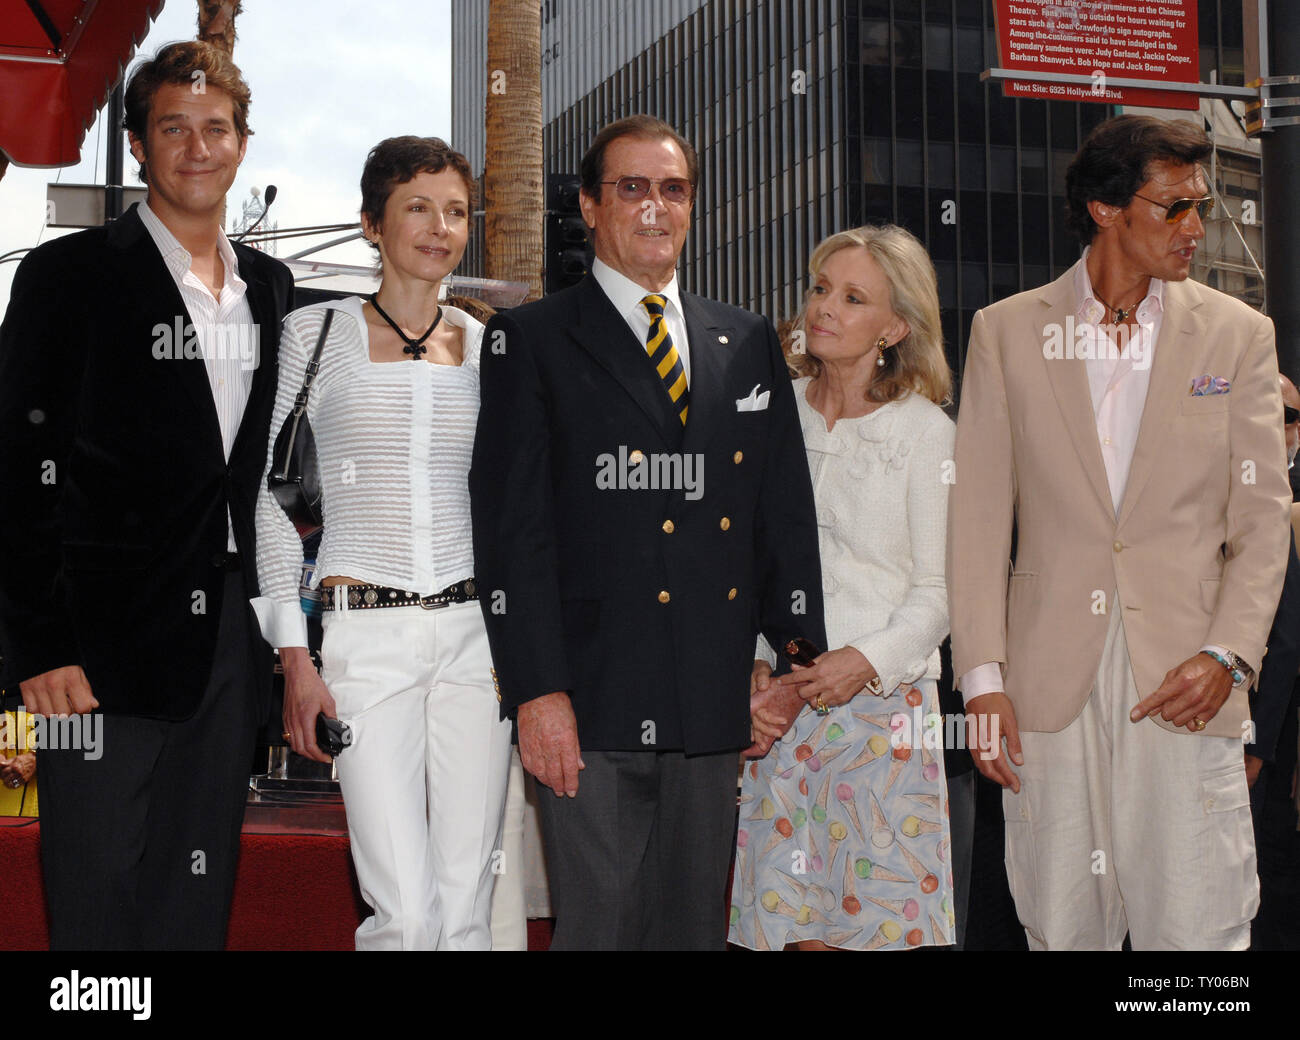 British actor Sir Roger Moore (C) poses with his wife, actress Christina Tholstrup (4th-L) and children Geoffrey (L), Deborah (2nd-L) and Christian (R), following an unveiling ceremony honoring him with the 2,350th star on the Hollywood Walk of Fame in Los Angeles on October 11, 2007. Moore appeared in 1973 in his first James Bond film 'Live and Let Die.' He also starred as Simon Templar in the TV series 'The Saint.'  (UPI Photo/Jim Ruymen) Stock Photo